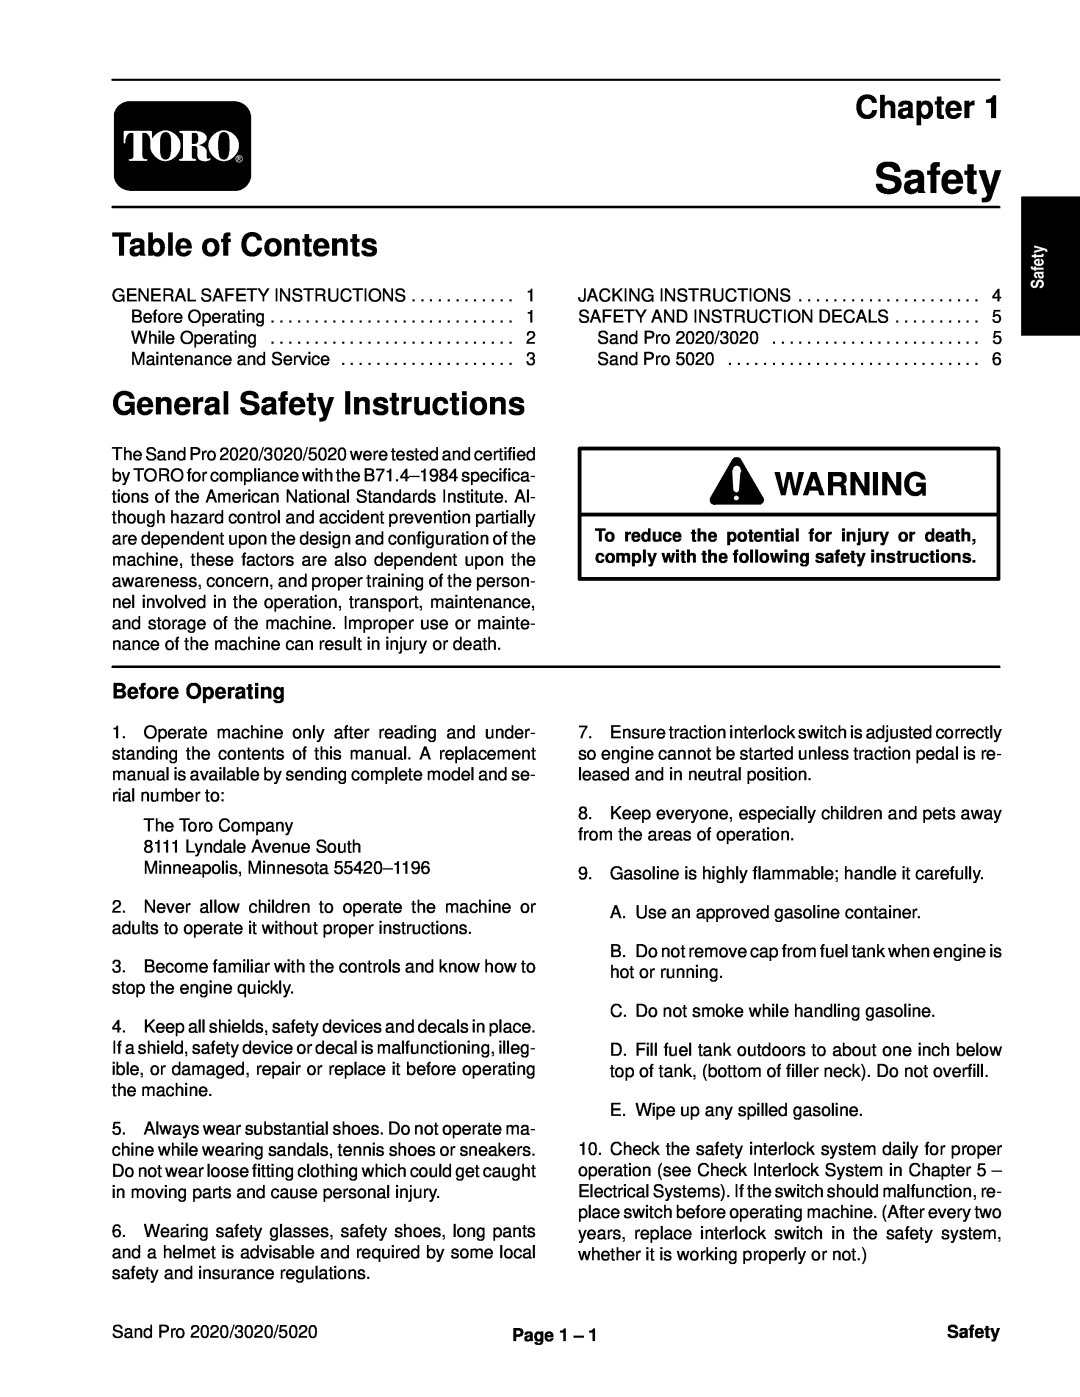 Toro Chapter, Table of Contents, General Safety Instructions, Before Operating, Sand Pro 2020/3020/5020, Page 1 